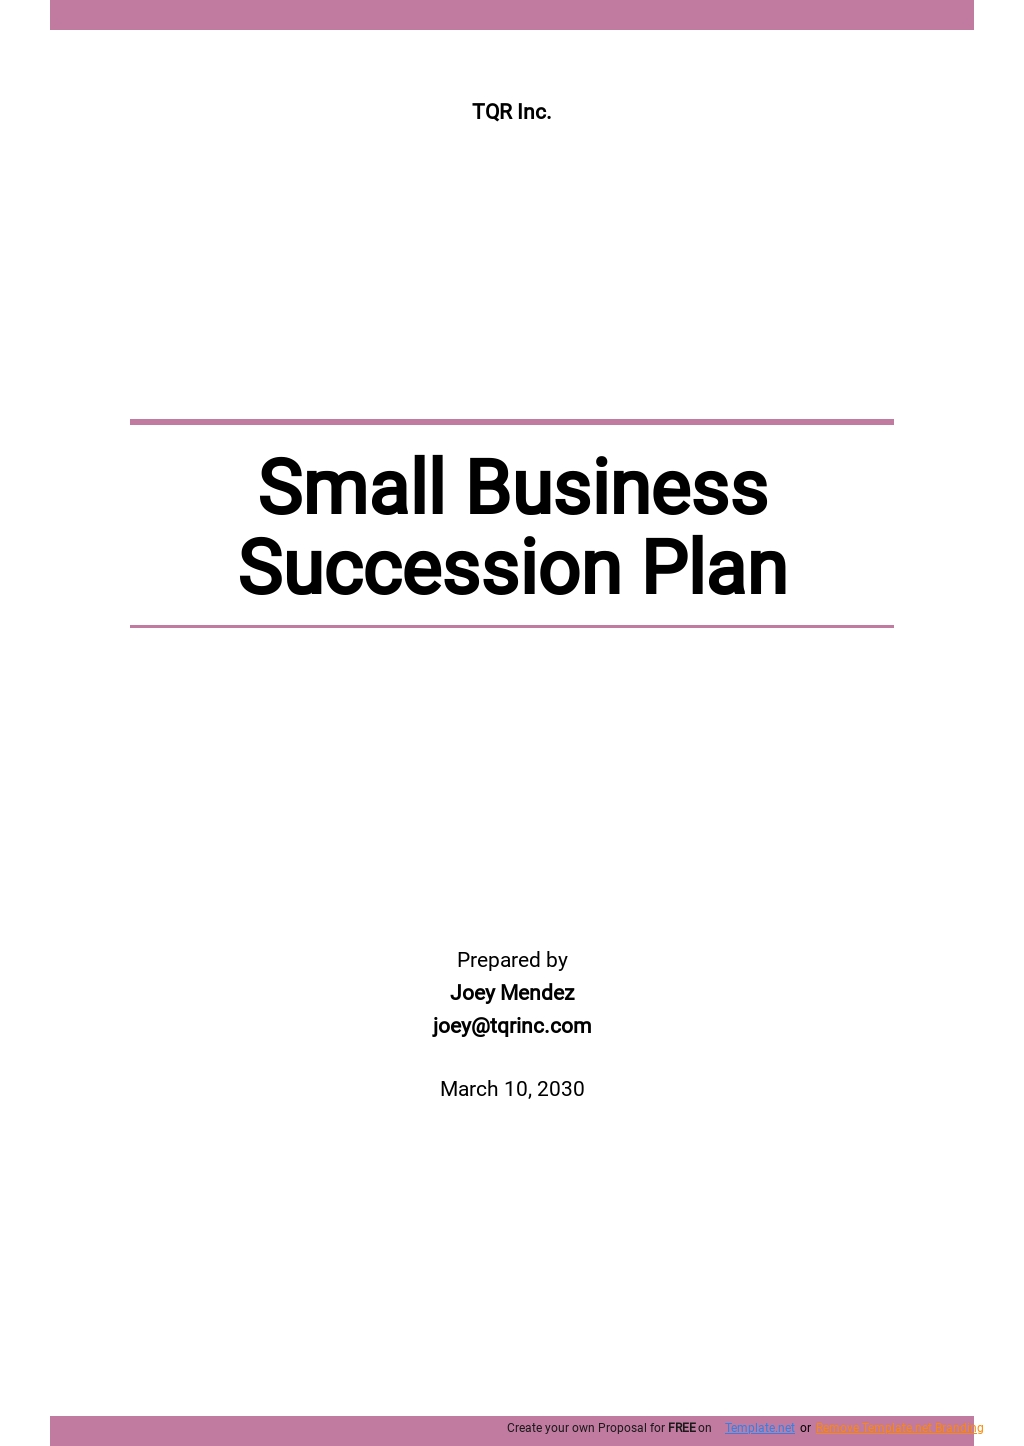 Small Business Succession Plan Template